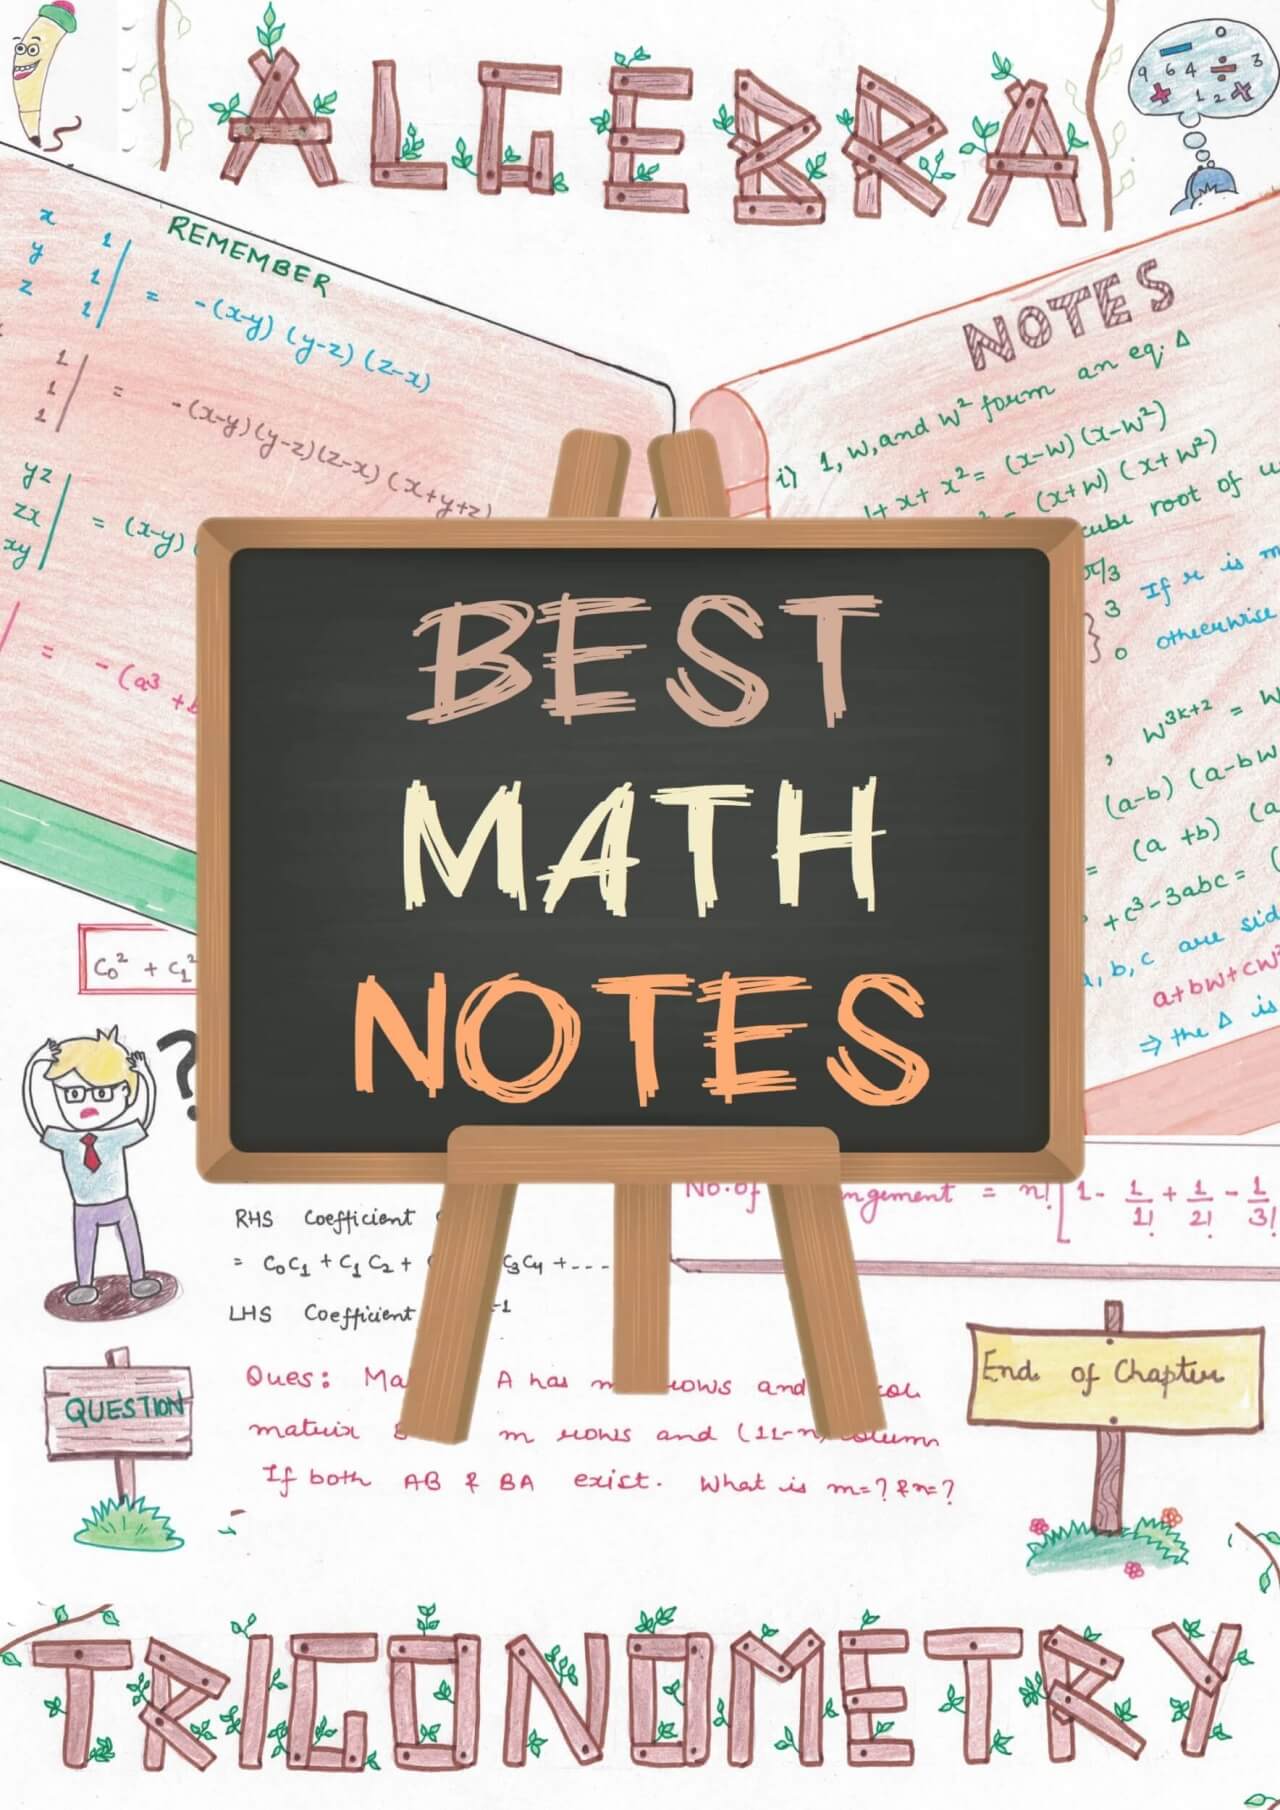 math study notes for class 11 12 jee pdf